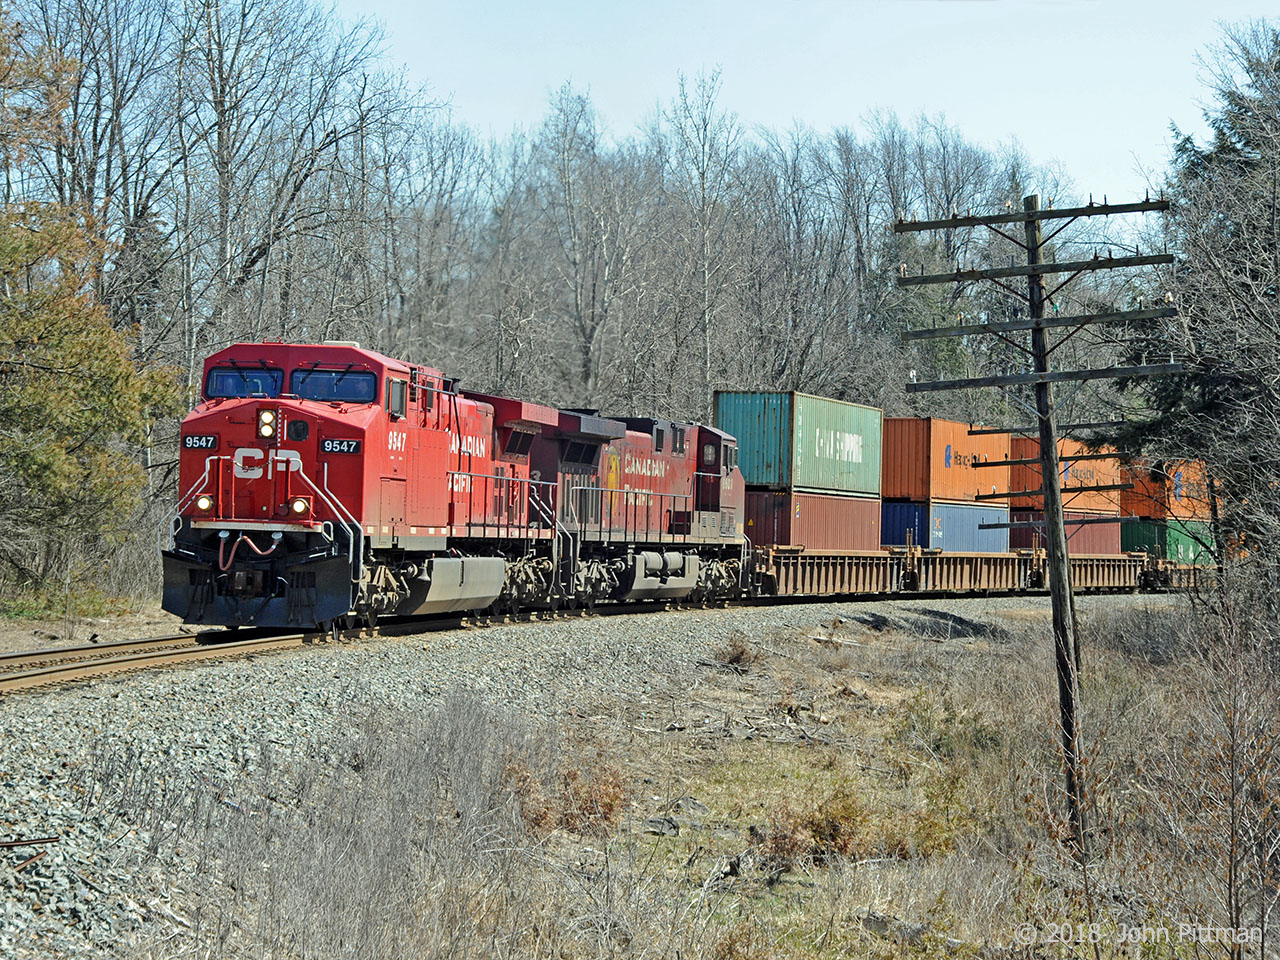 CP 9547 (AC4400cw) and CP 8603 (AC4400cw), both equipped with GE steerable trucks, are pulling train CP 142  upgrade north on the CP Hamilton sub with the assistance of pusher set CP 2211, CP 7307, CP 2292. The front end is seconds away from the Parkside Drive grade crossing in Waterdown North. A few miles ahead the train will have completed the steepest part of the ascent from Lake Ontario level to Lake Erie level.  The pushers will cut off and return light to Hamilton, while 142 continues to CP Guelph Junction and beyond. 
CP 9547 is from CP's original 1995 batch of AC4400's that began CP's change from an SD40-2 dominated railway.  These 9500's were not equipped with steerable trucks when new, and were delivered in the CP Rail System dual flags scheme which proved unpopular on both sides of the border.